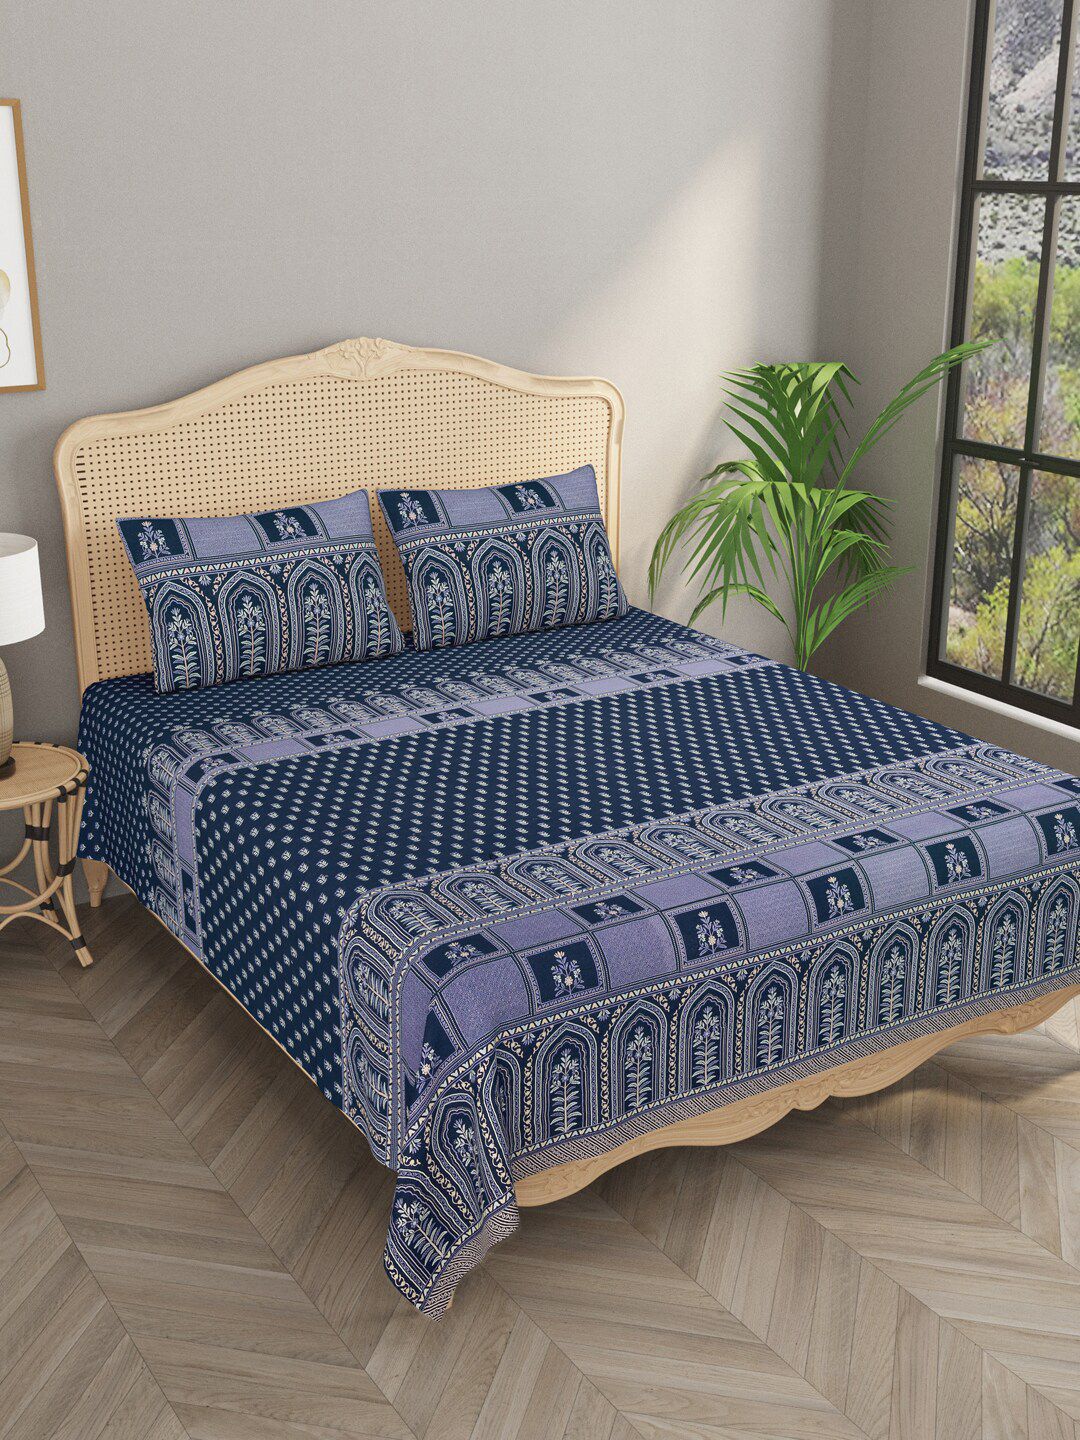 Gulaab Jaipur Blue & Peach-Coloured 400 TC Cotton King Bedsheet with 2 Pillow Covers Price in India